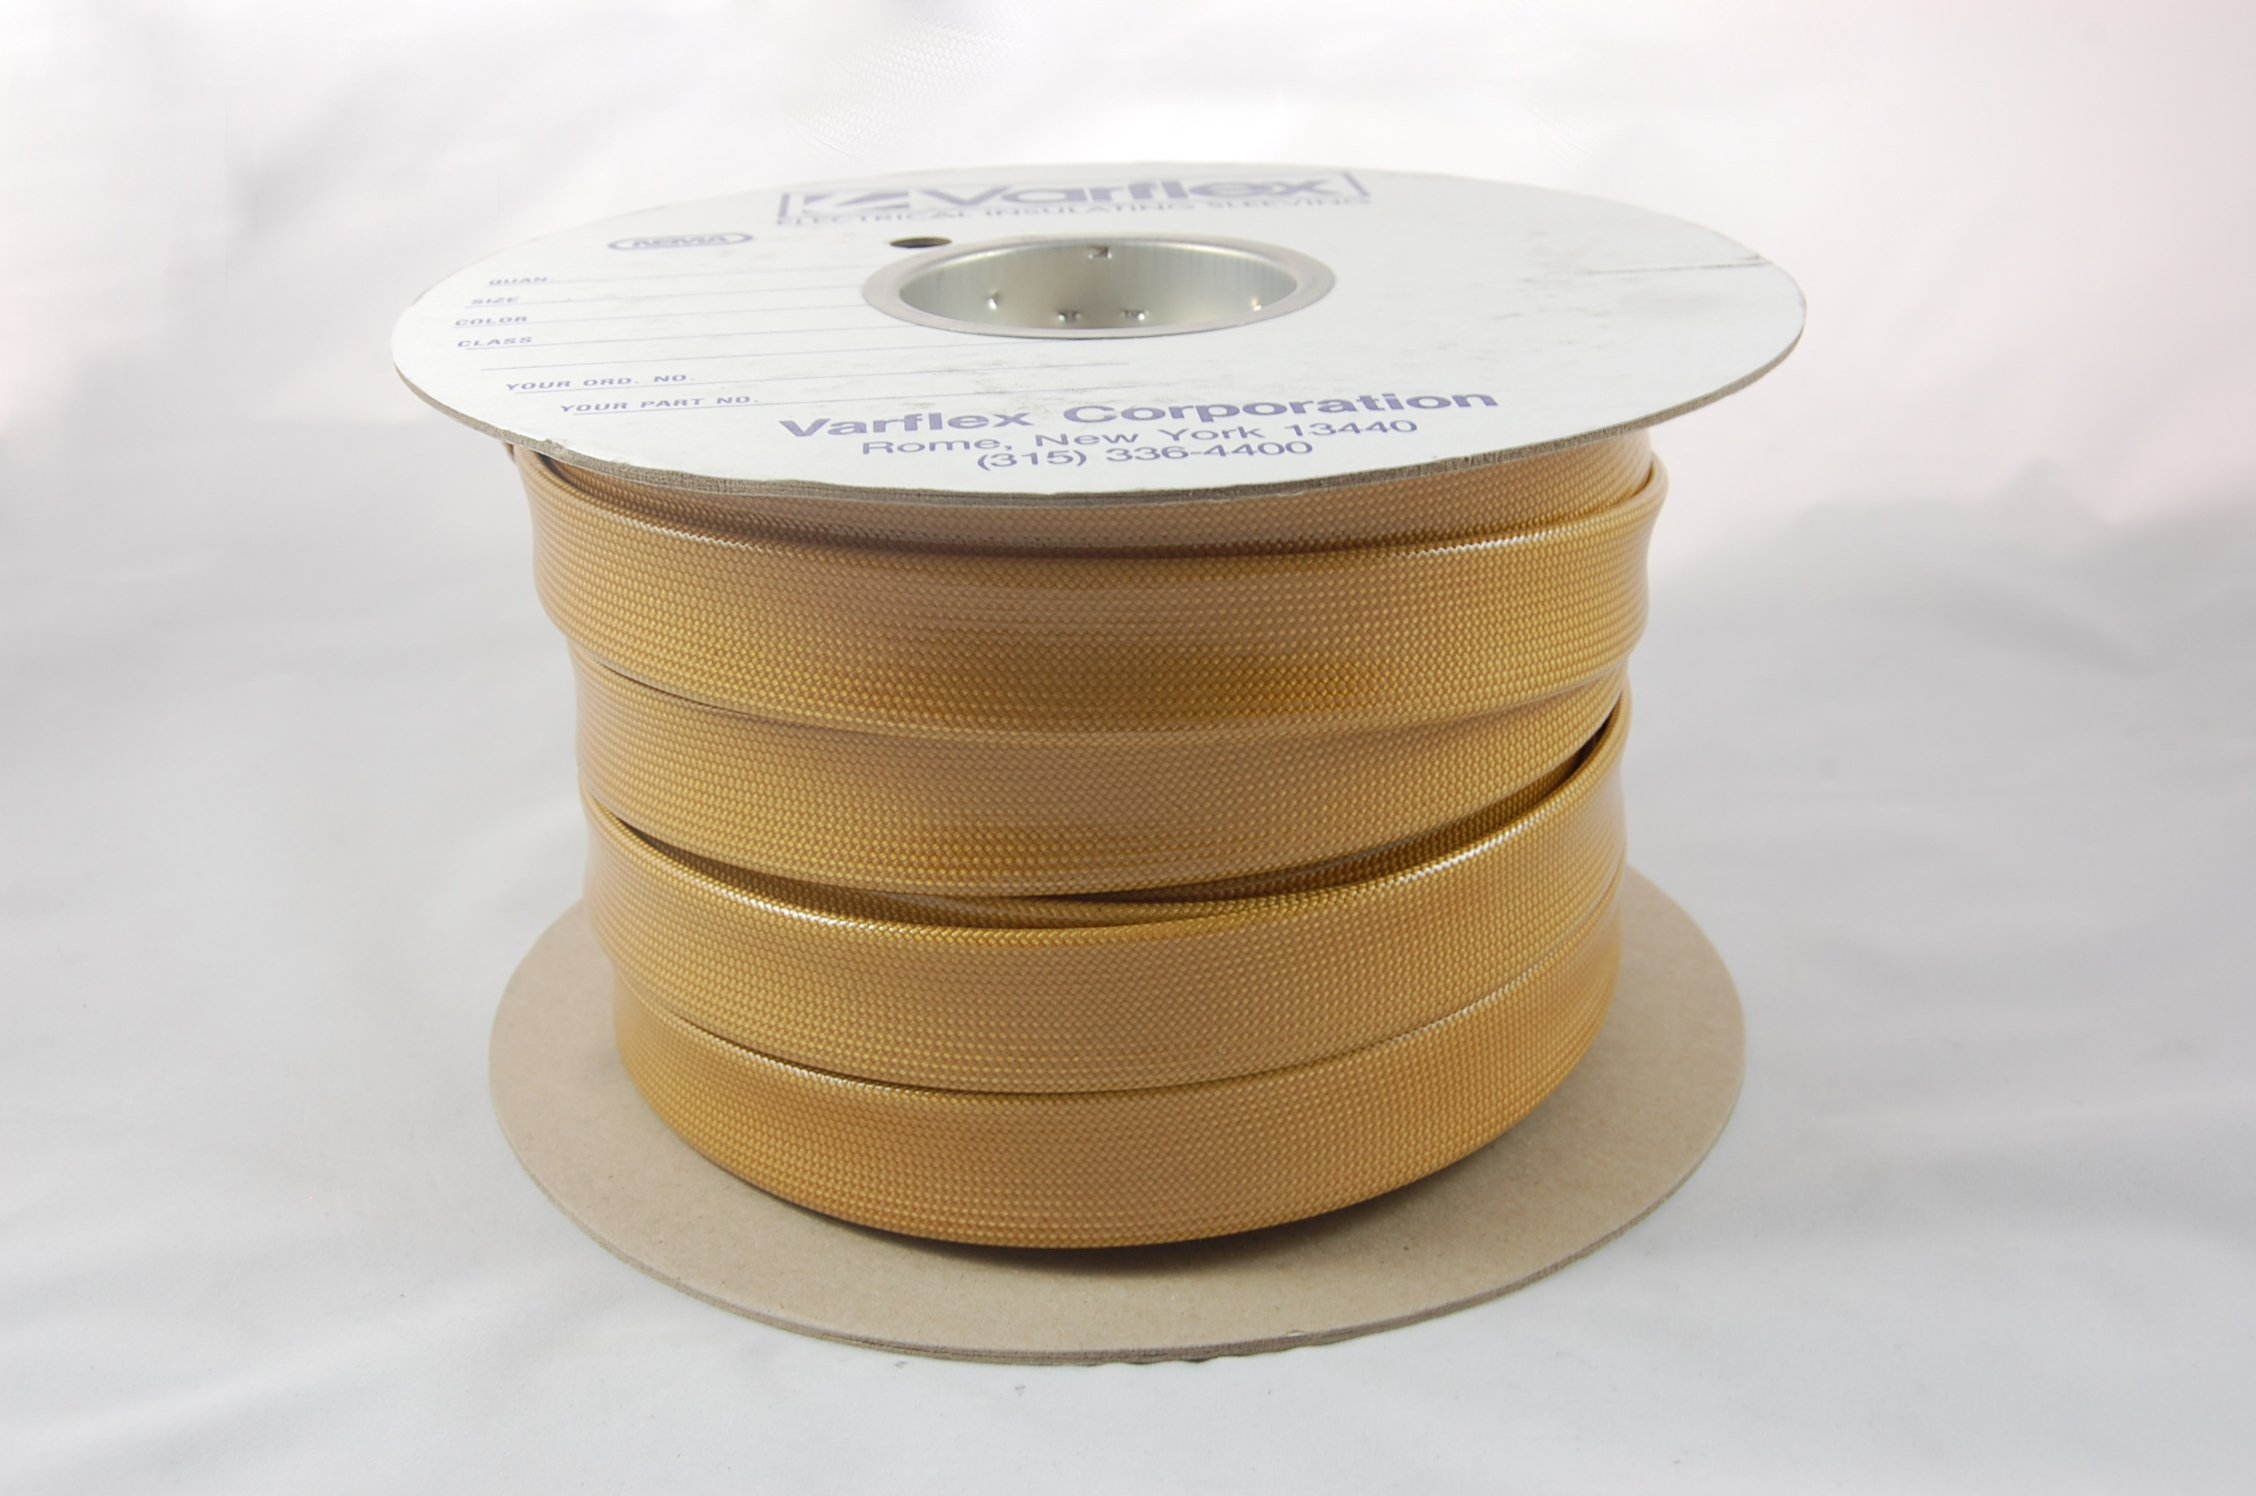 3/4" AWG Varglas Silicone Resin 500 Grade H-A-1 (8000V) High Temperature Silicone Resin Coated Braided Fiberglass Sleeving 200°C, natural, 100 FT per spool